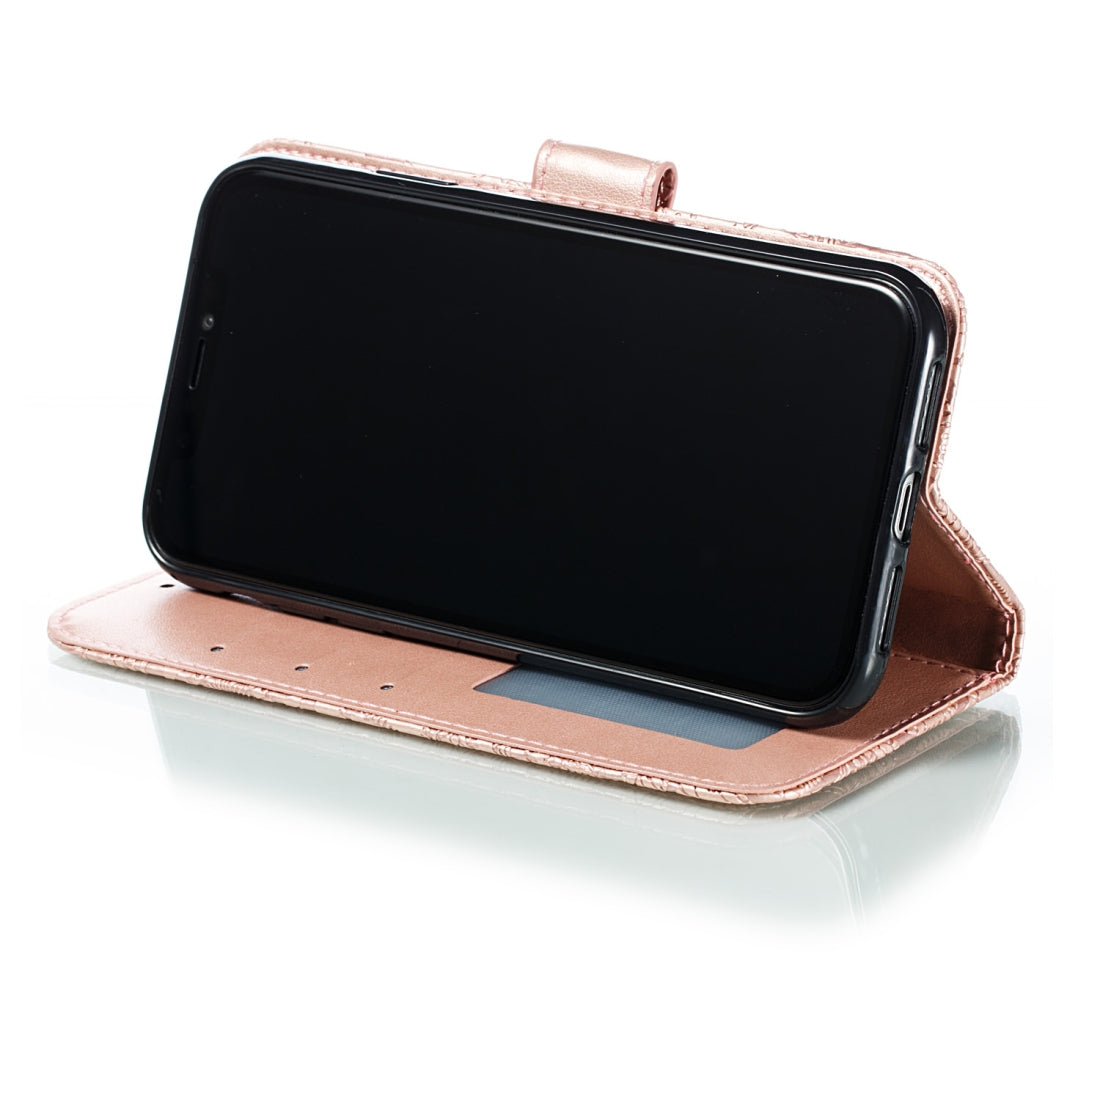 Lace Flower Horizontal Flip Leather Case with Holder & Card Slots & Wallet for iPhone 11(Rose Gold)